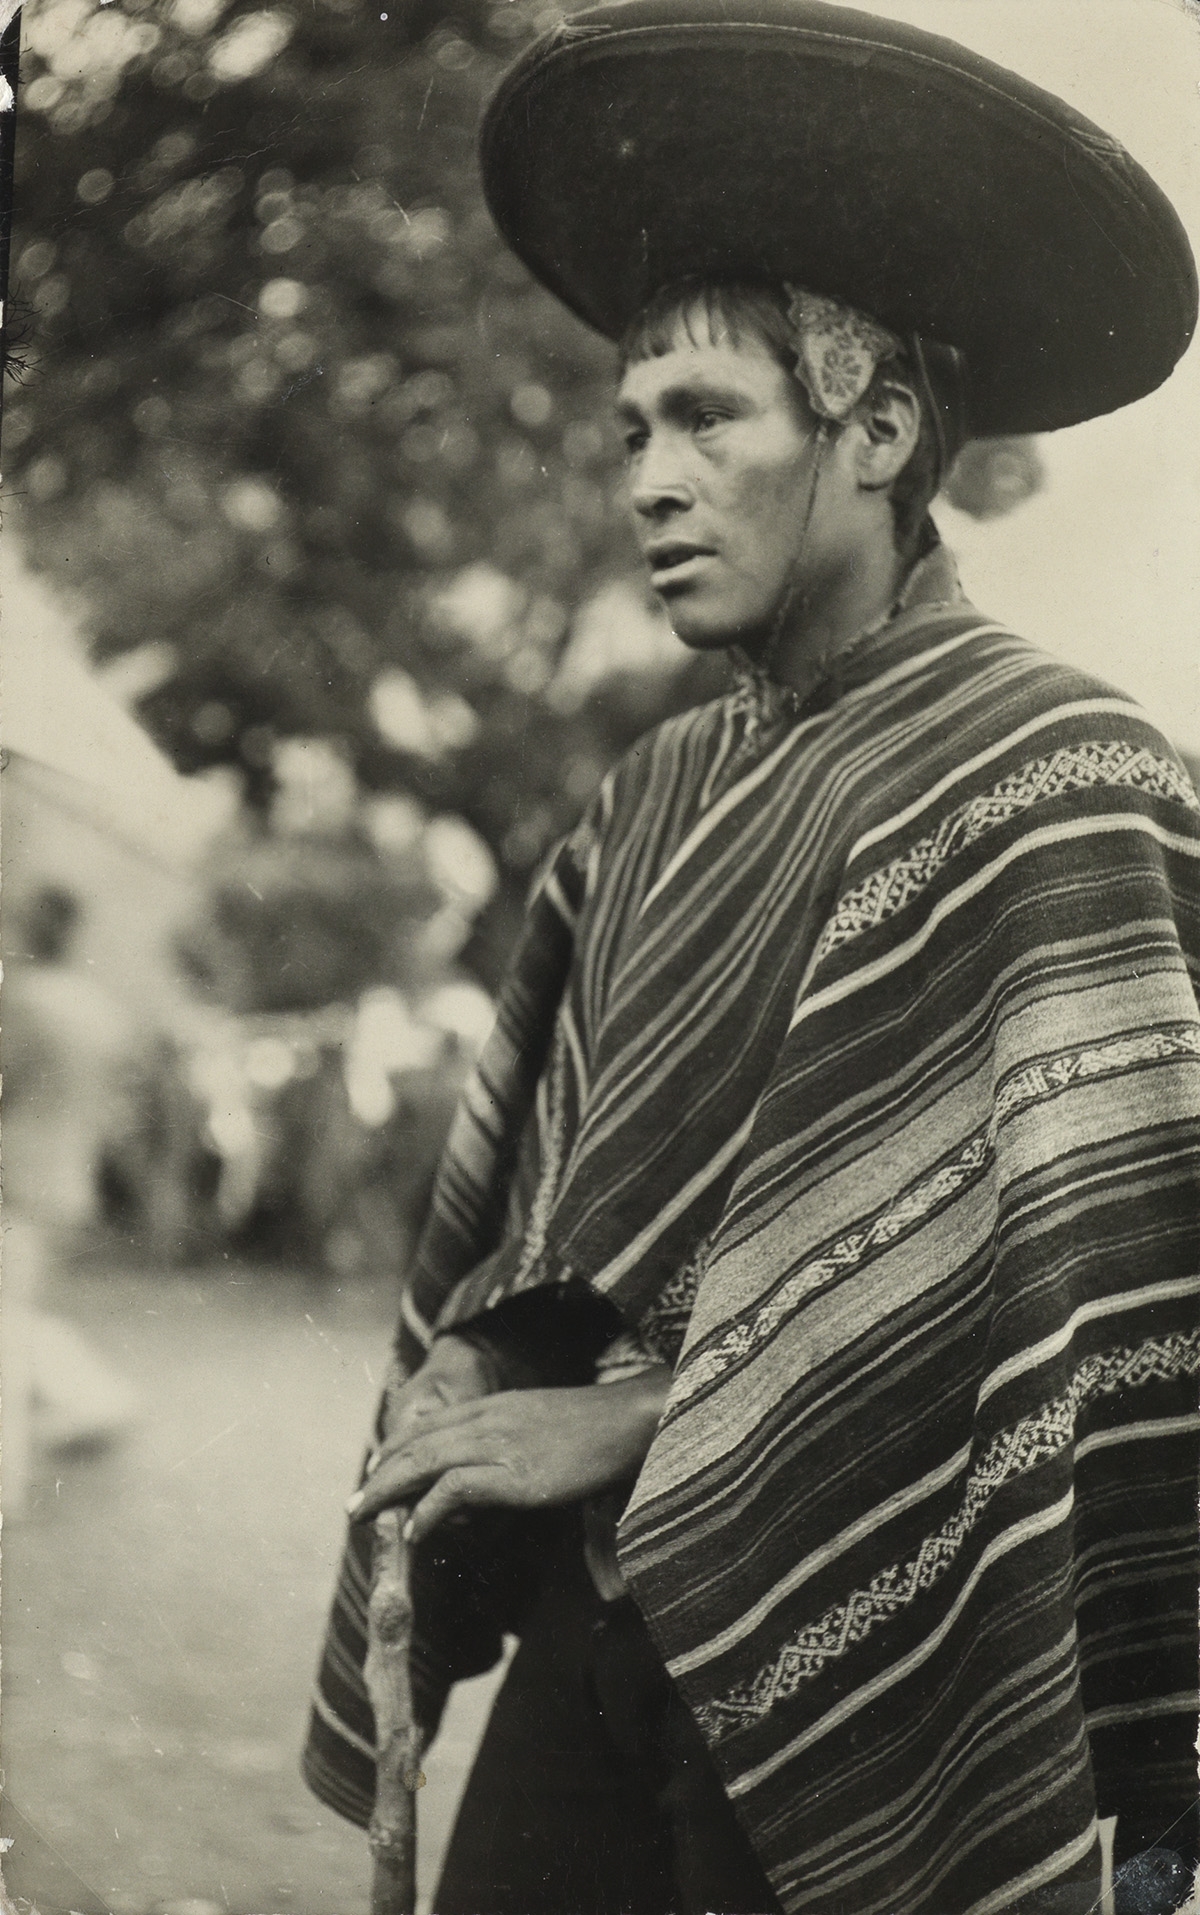 A group of 8 photographs of indigenous figures in Peru. by Martin Chambi, 1920s-30s